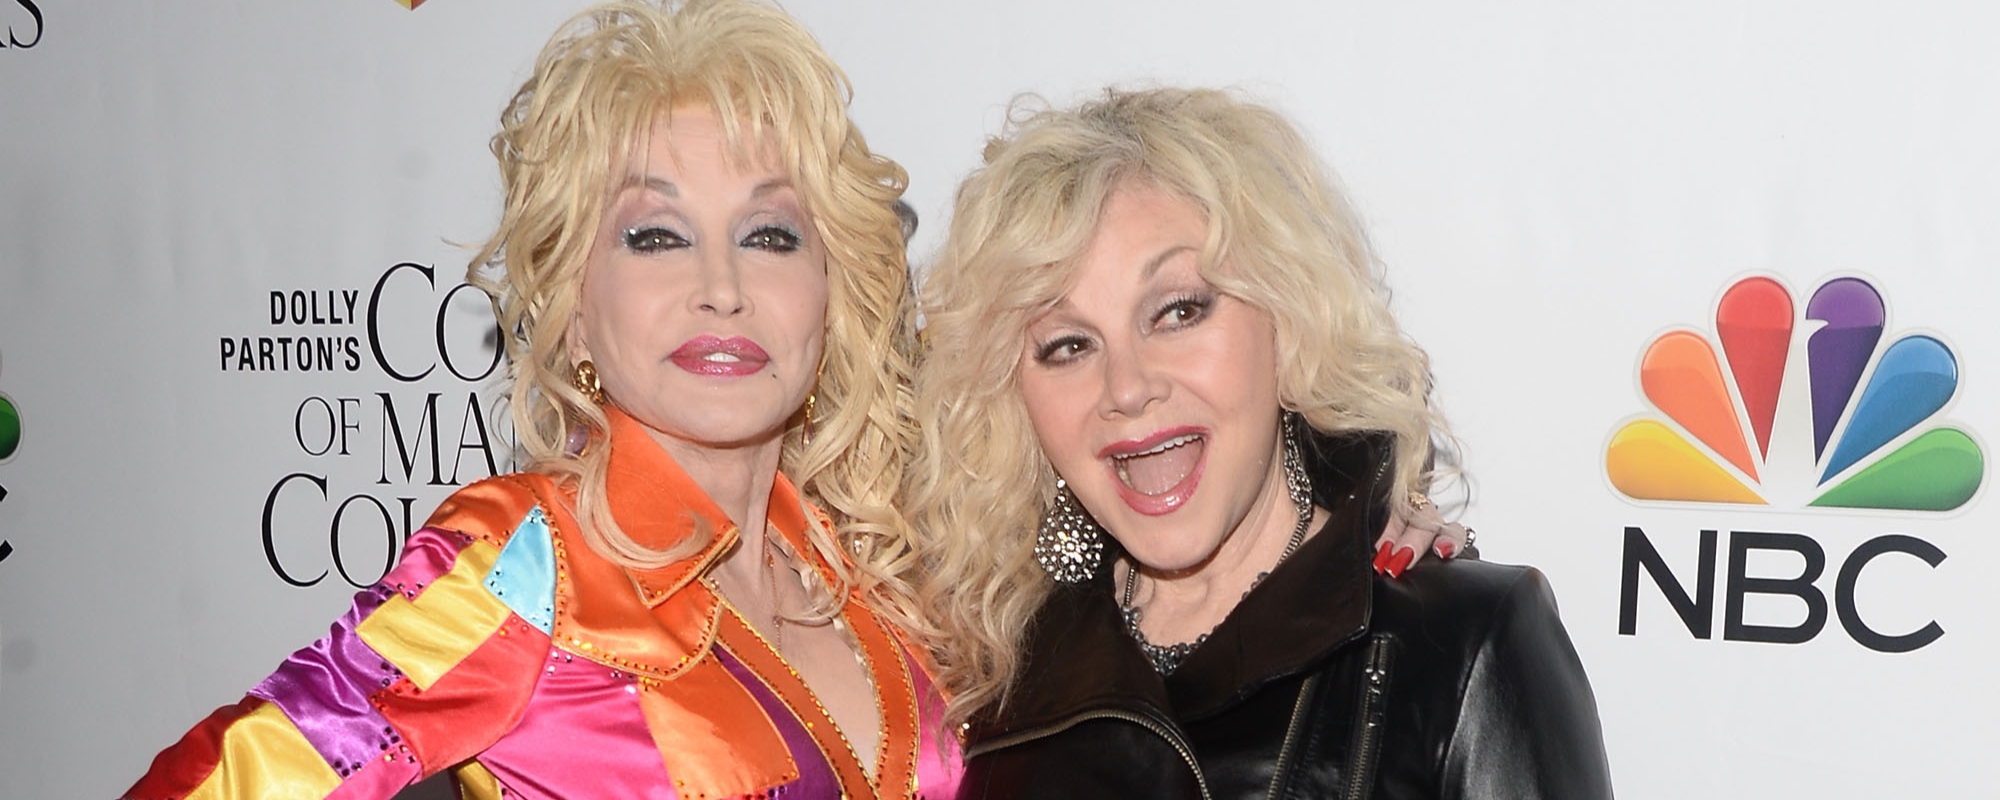 Dolly Parton’s Sister Fires Off NSFW Tweet After Backlash Over NFL Halftime Show